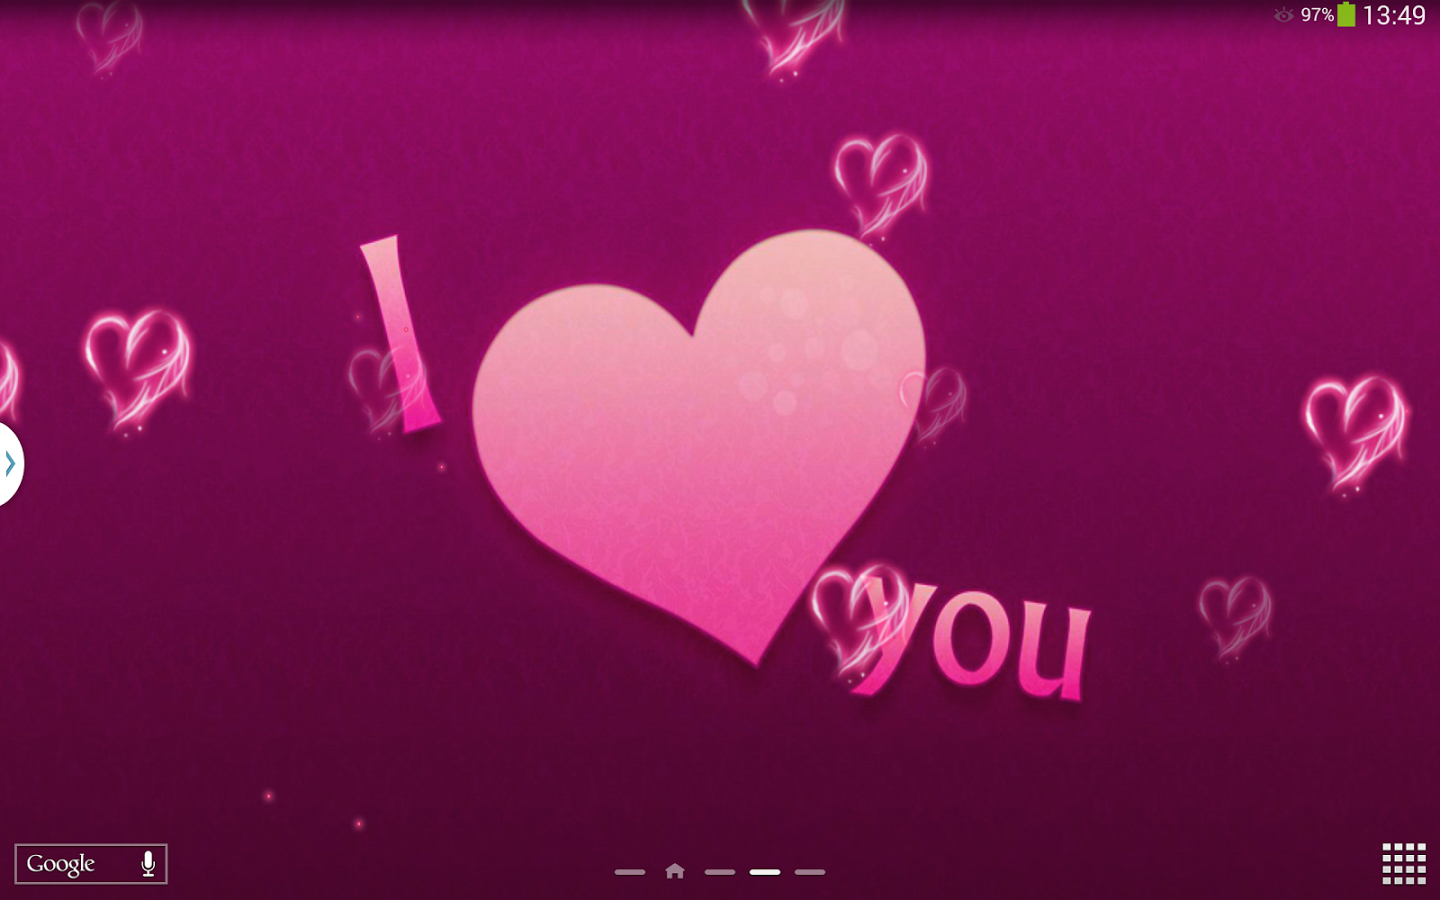 I Love You Live Wallpaper - Android Apps on Google Play